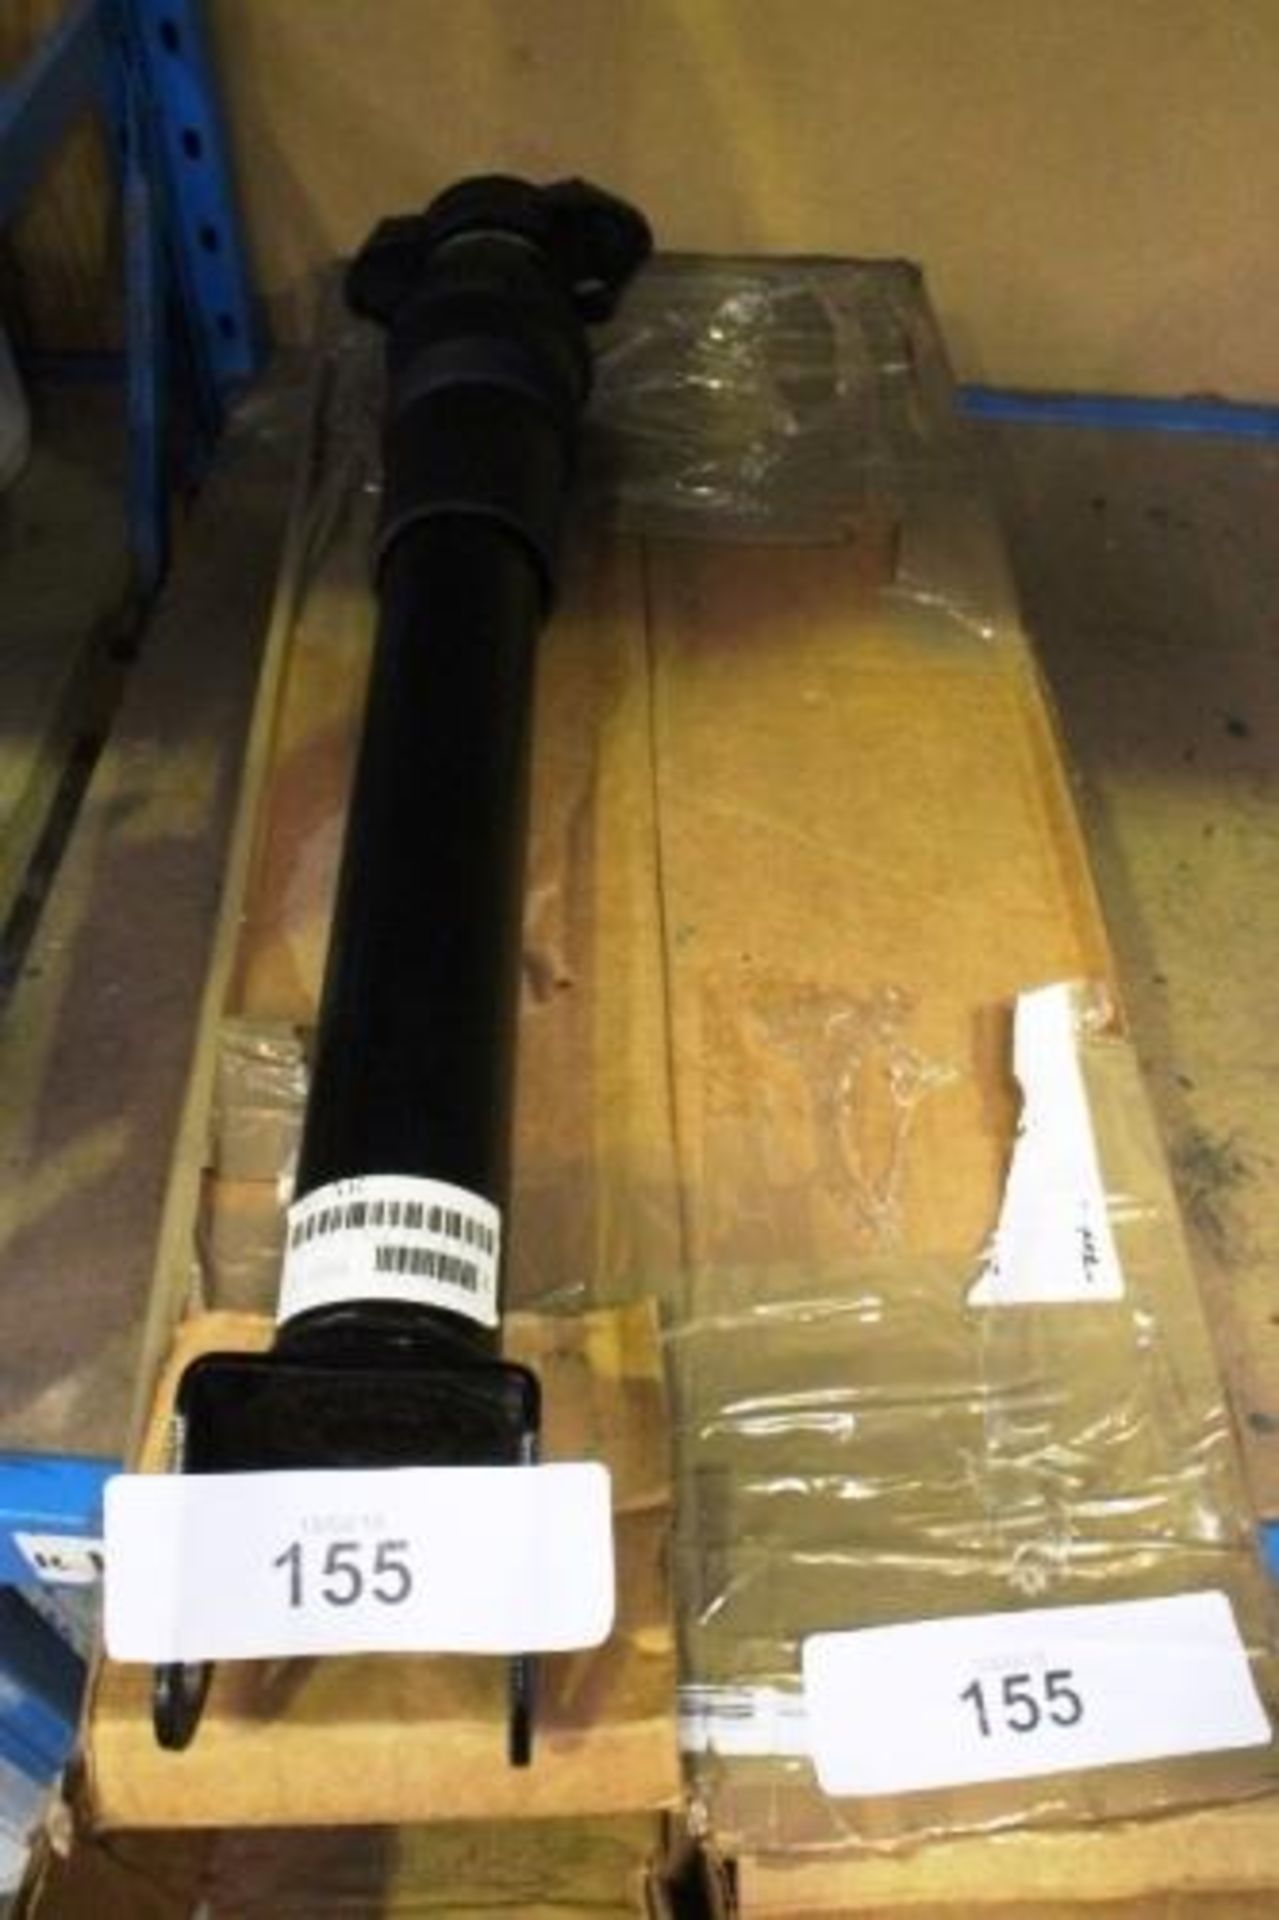 2 x Mercedes Benz rear shock absorbers, reference number 1643201531- (ESB10)